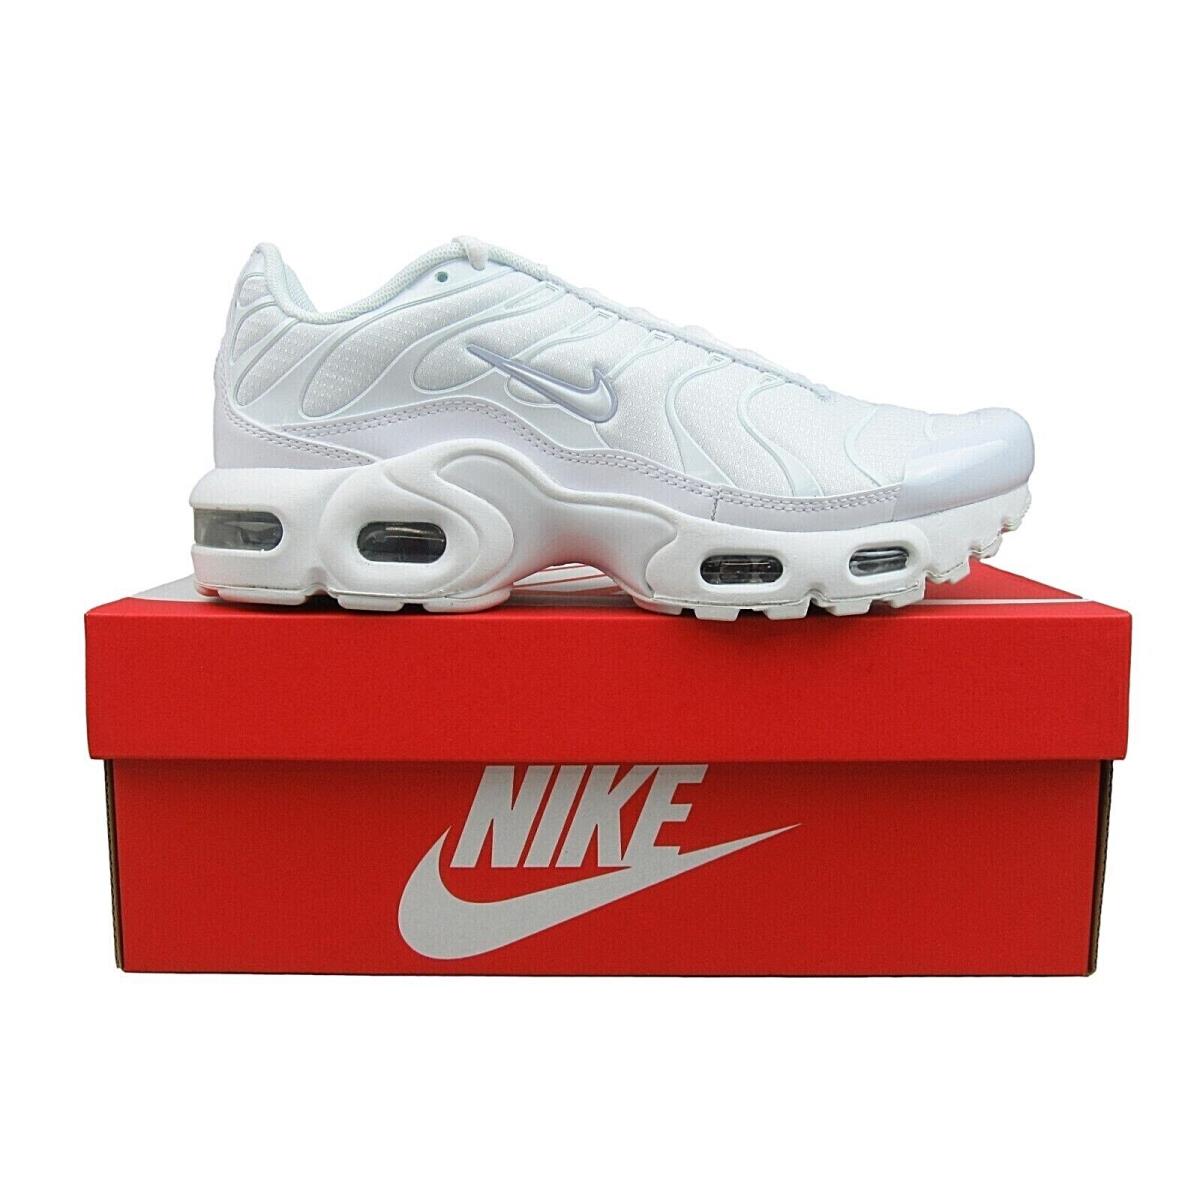 Nike Air Max Plus White GS Youth Shoes Size 6Y / Womens 7.5 CW7044-100